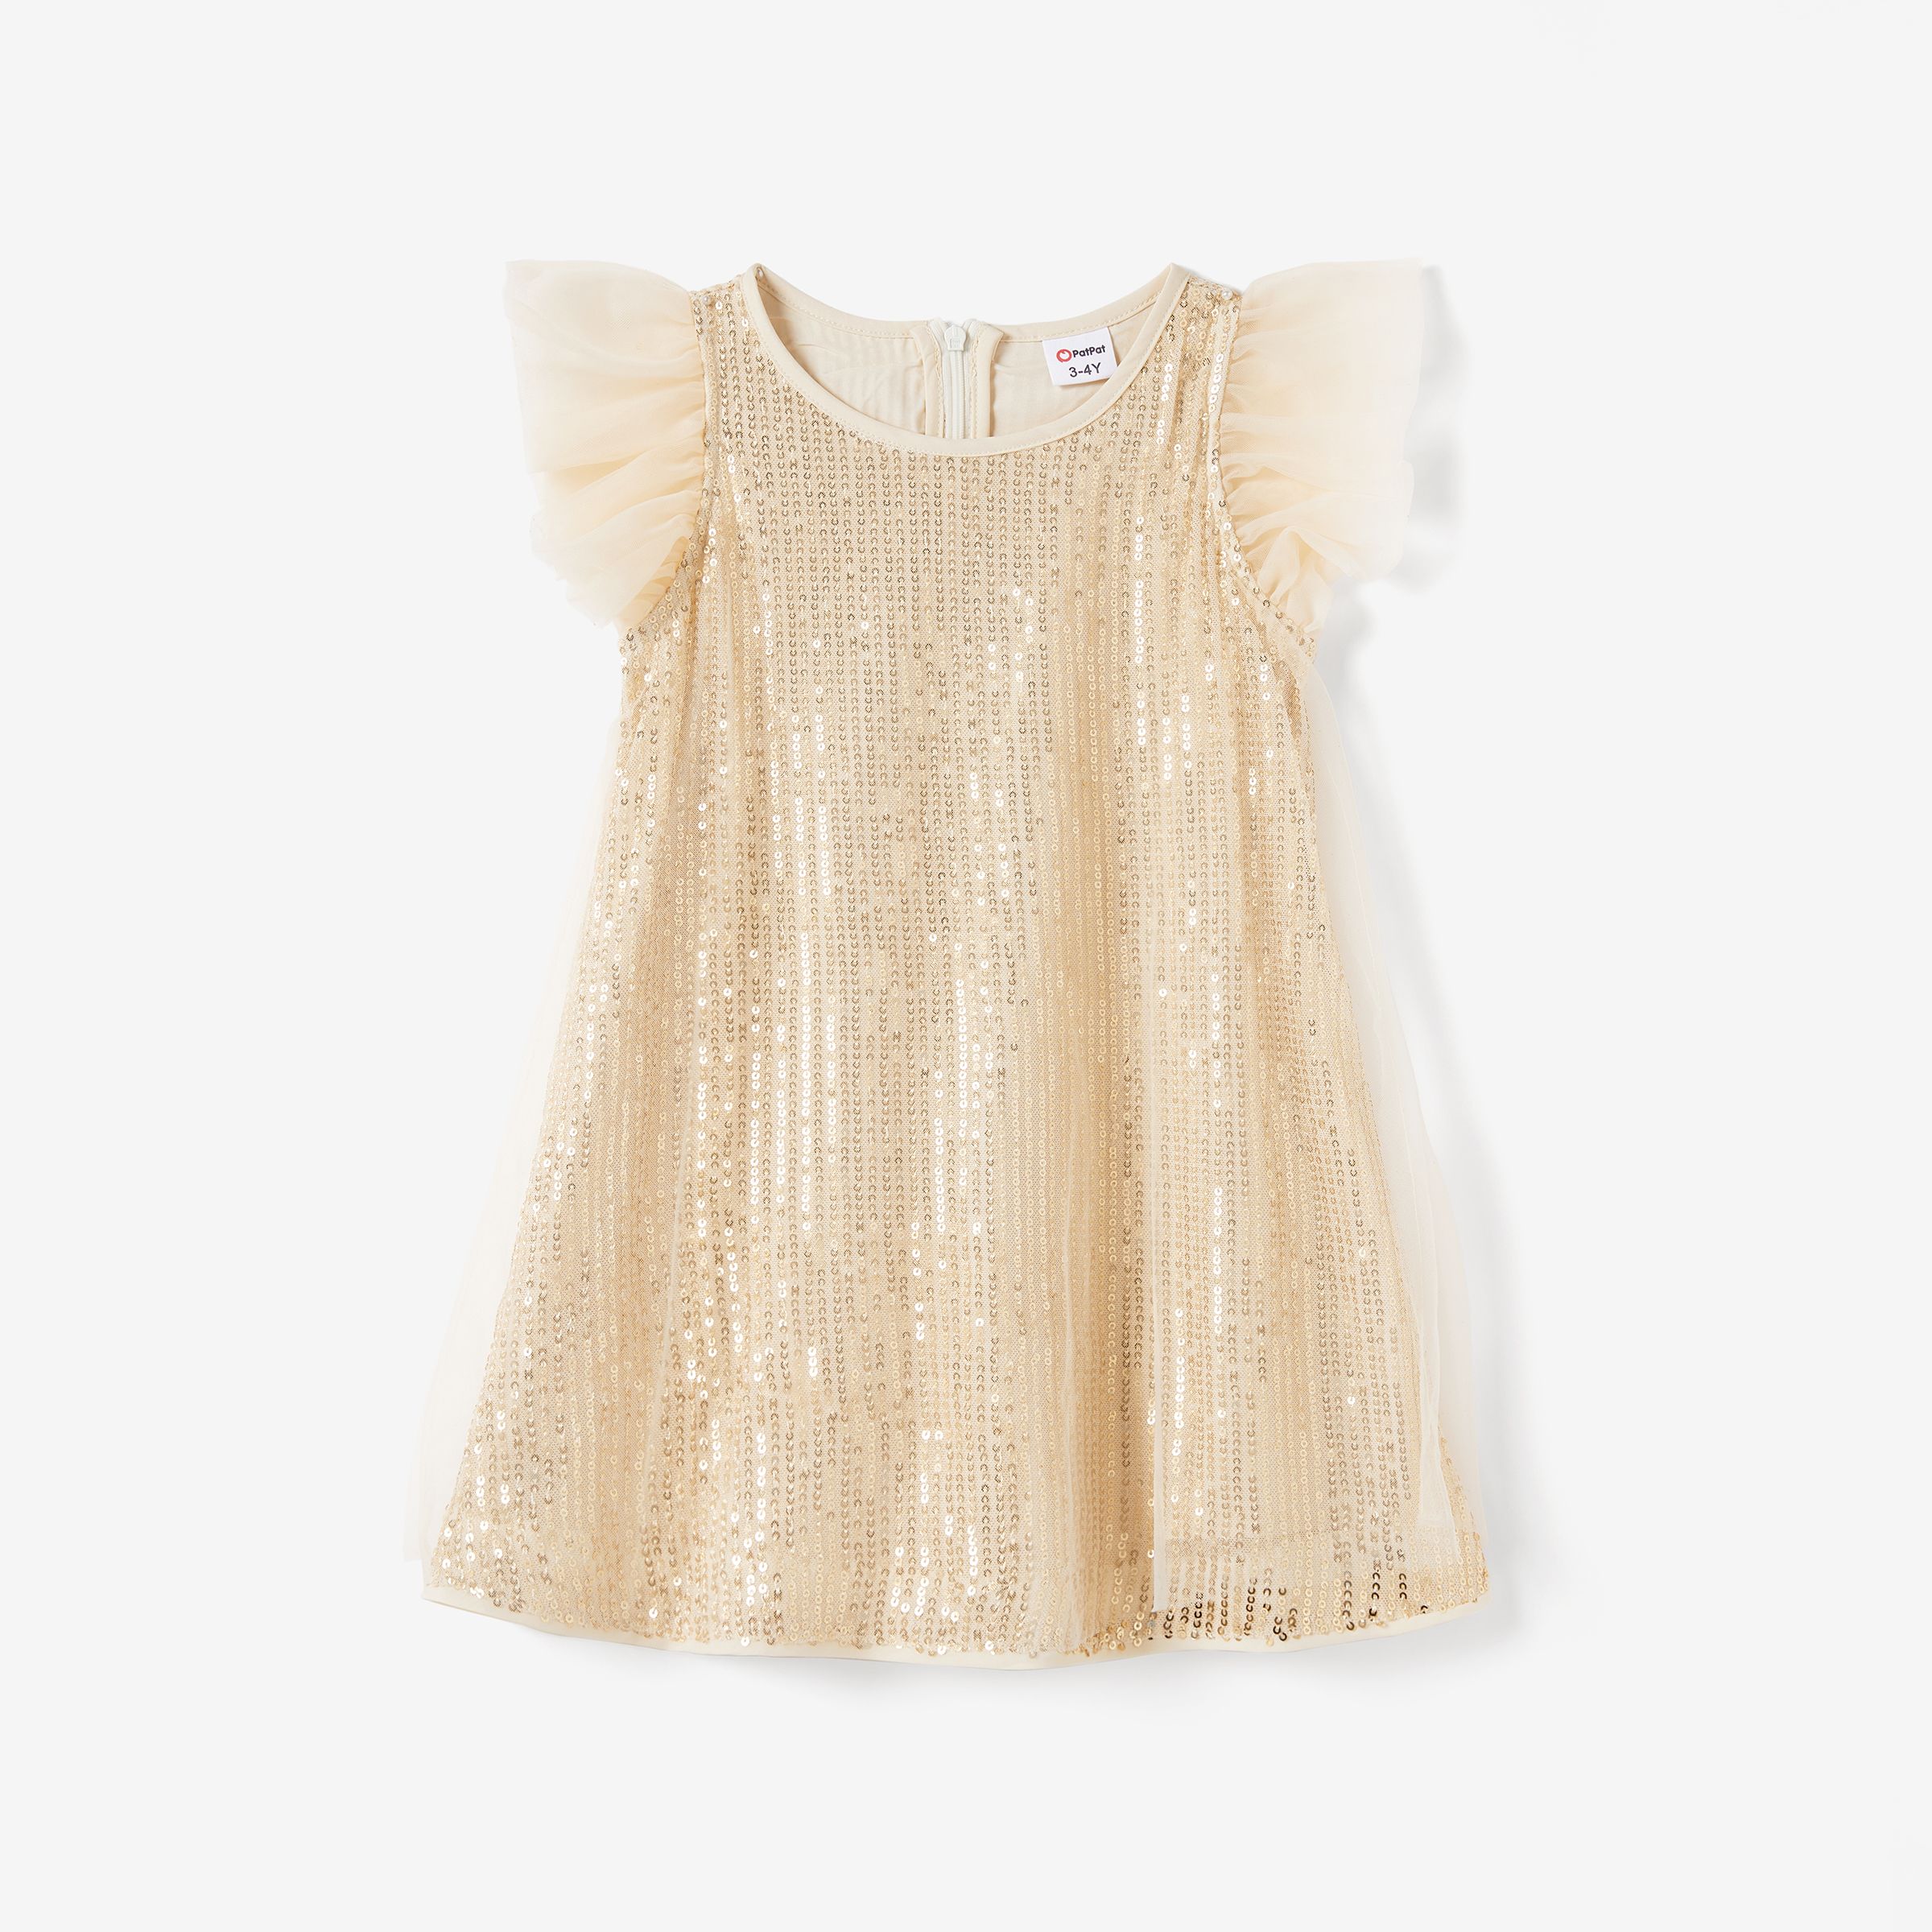 Mommy and Me Almond Color Sequined Sleeveless A-Line Dresses